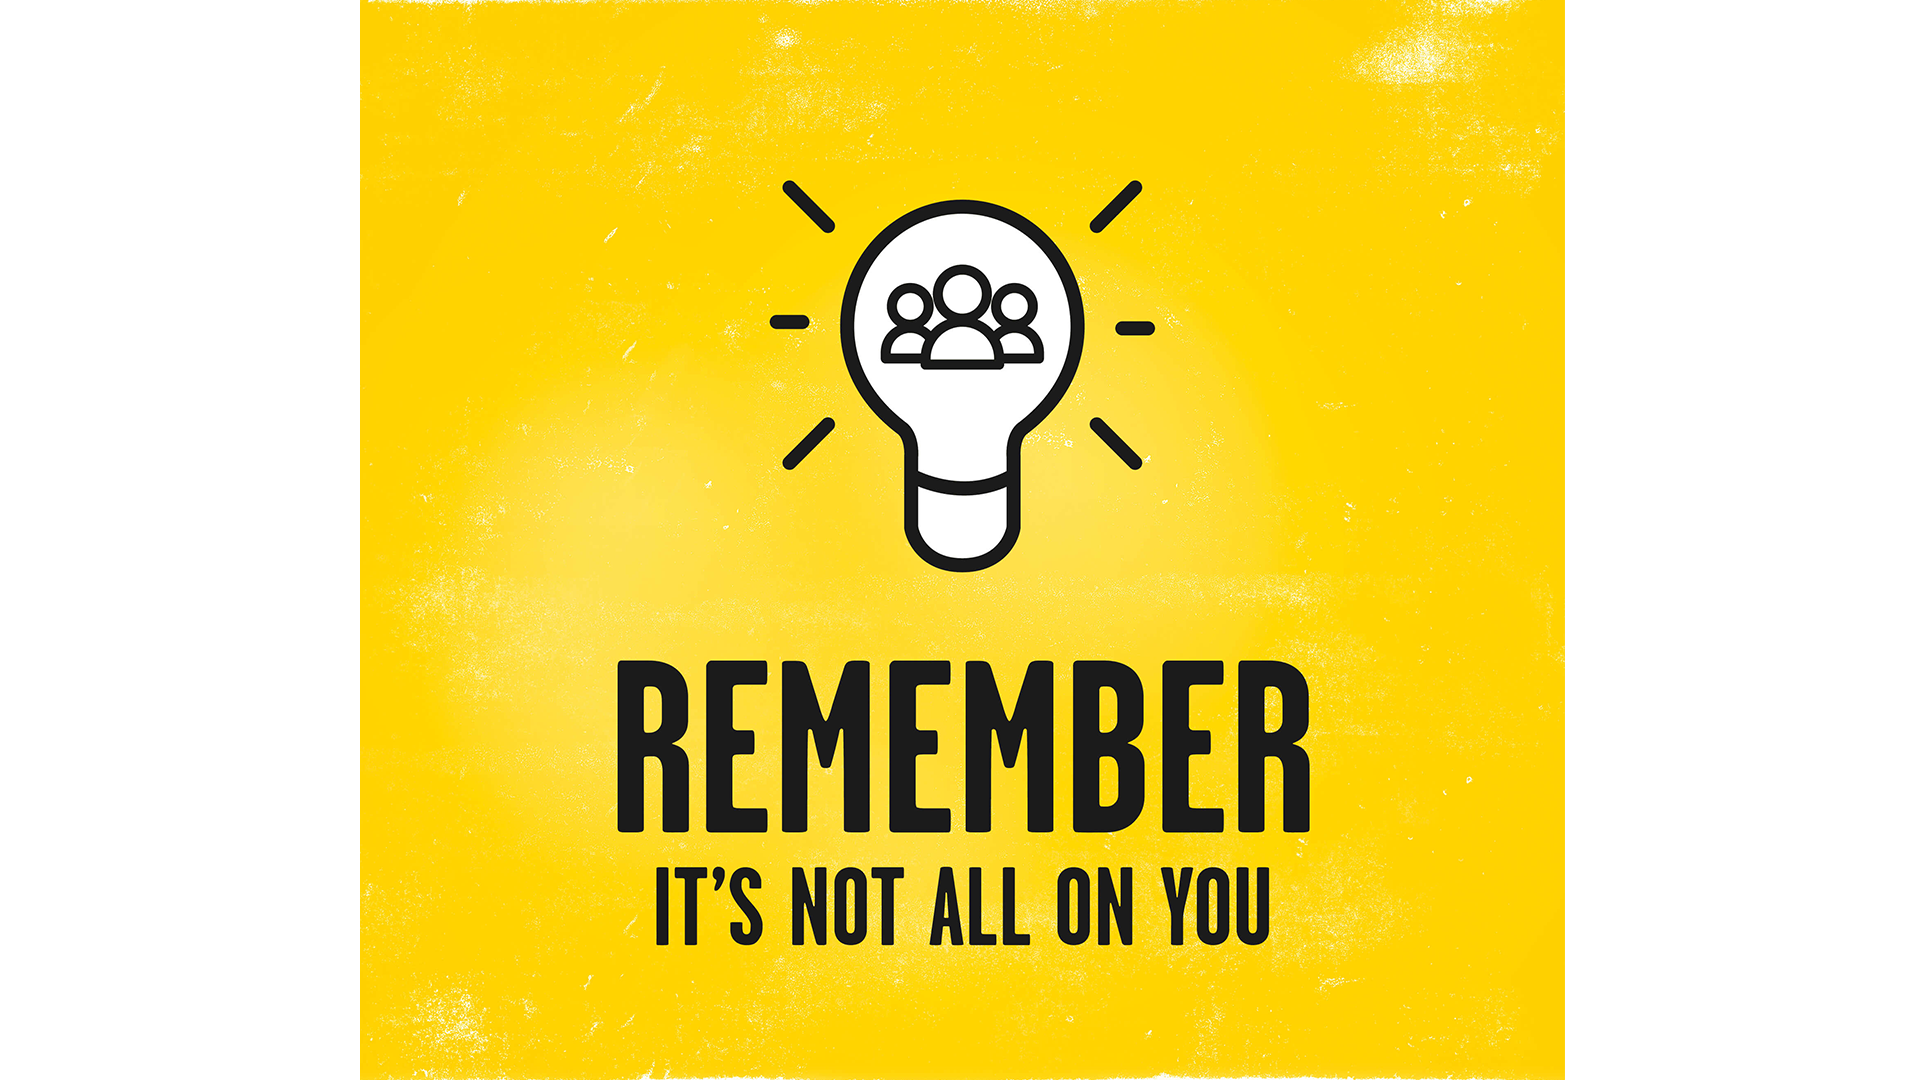 A lightbulb with a symbol of three people inside. Text reads: "Remember it's not all on you".